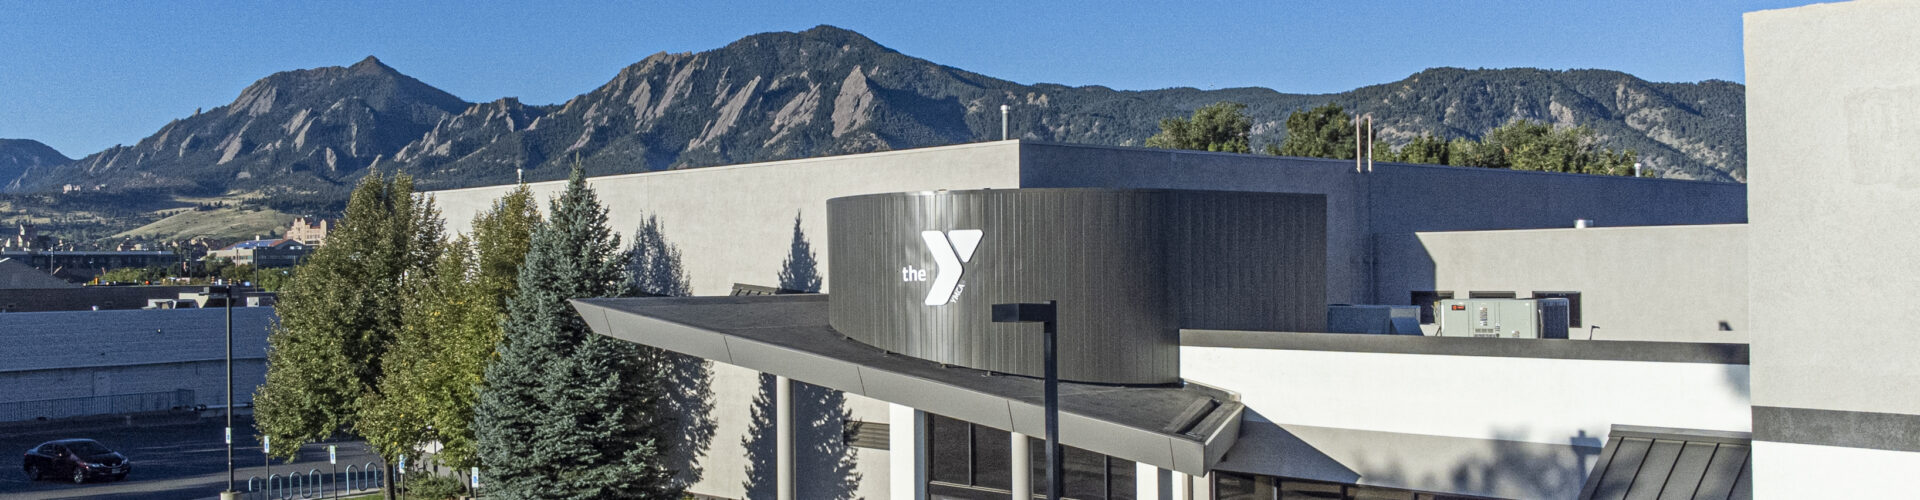 Photo of the Boulder YMCA building with the front range in the background